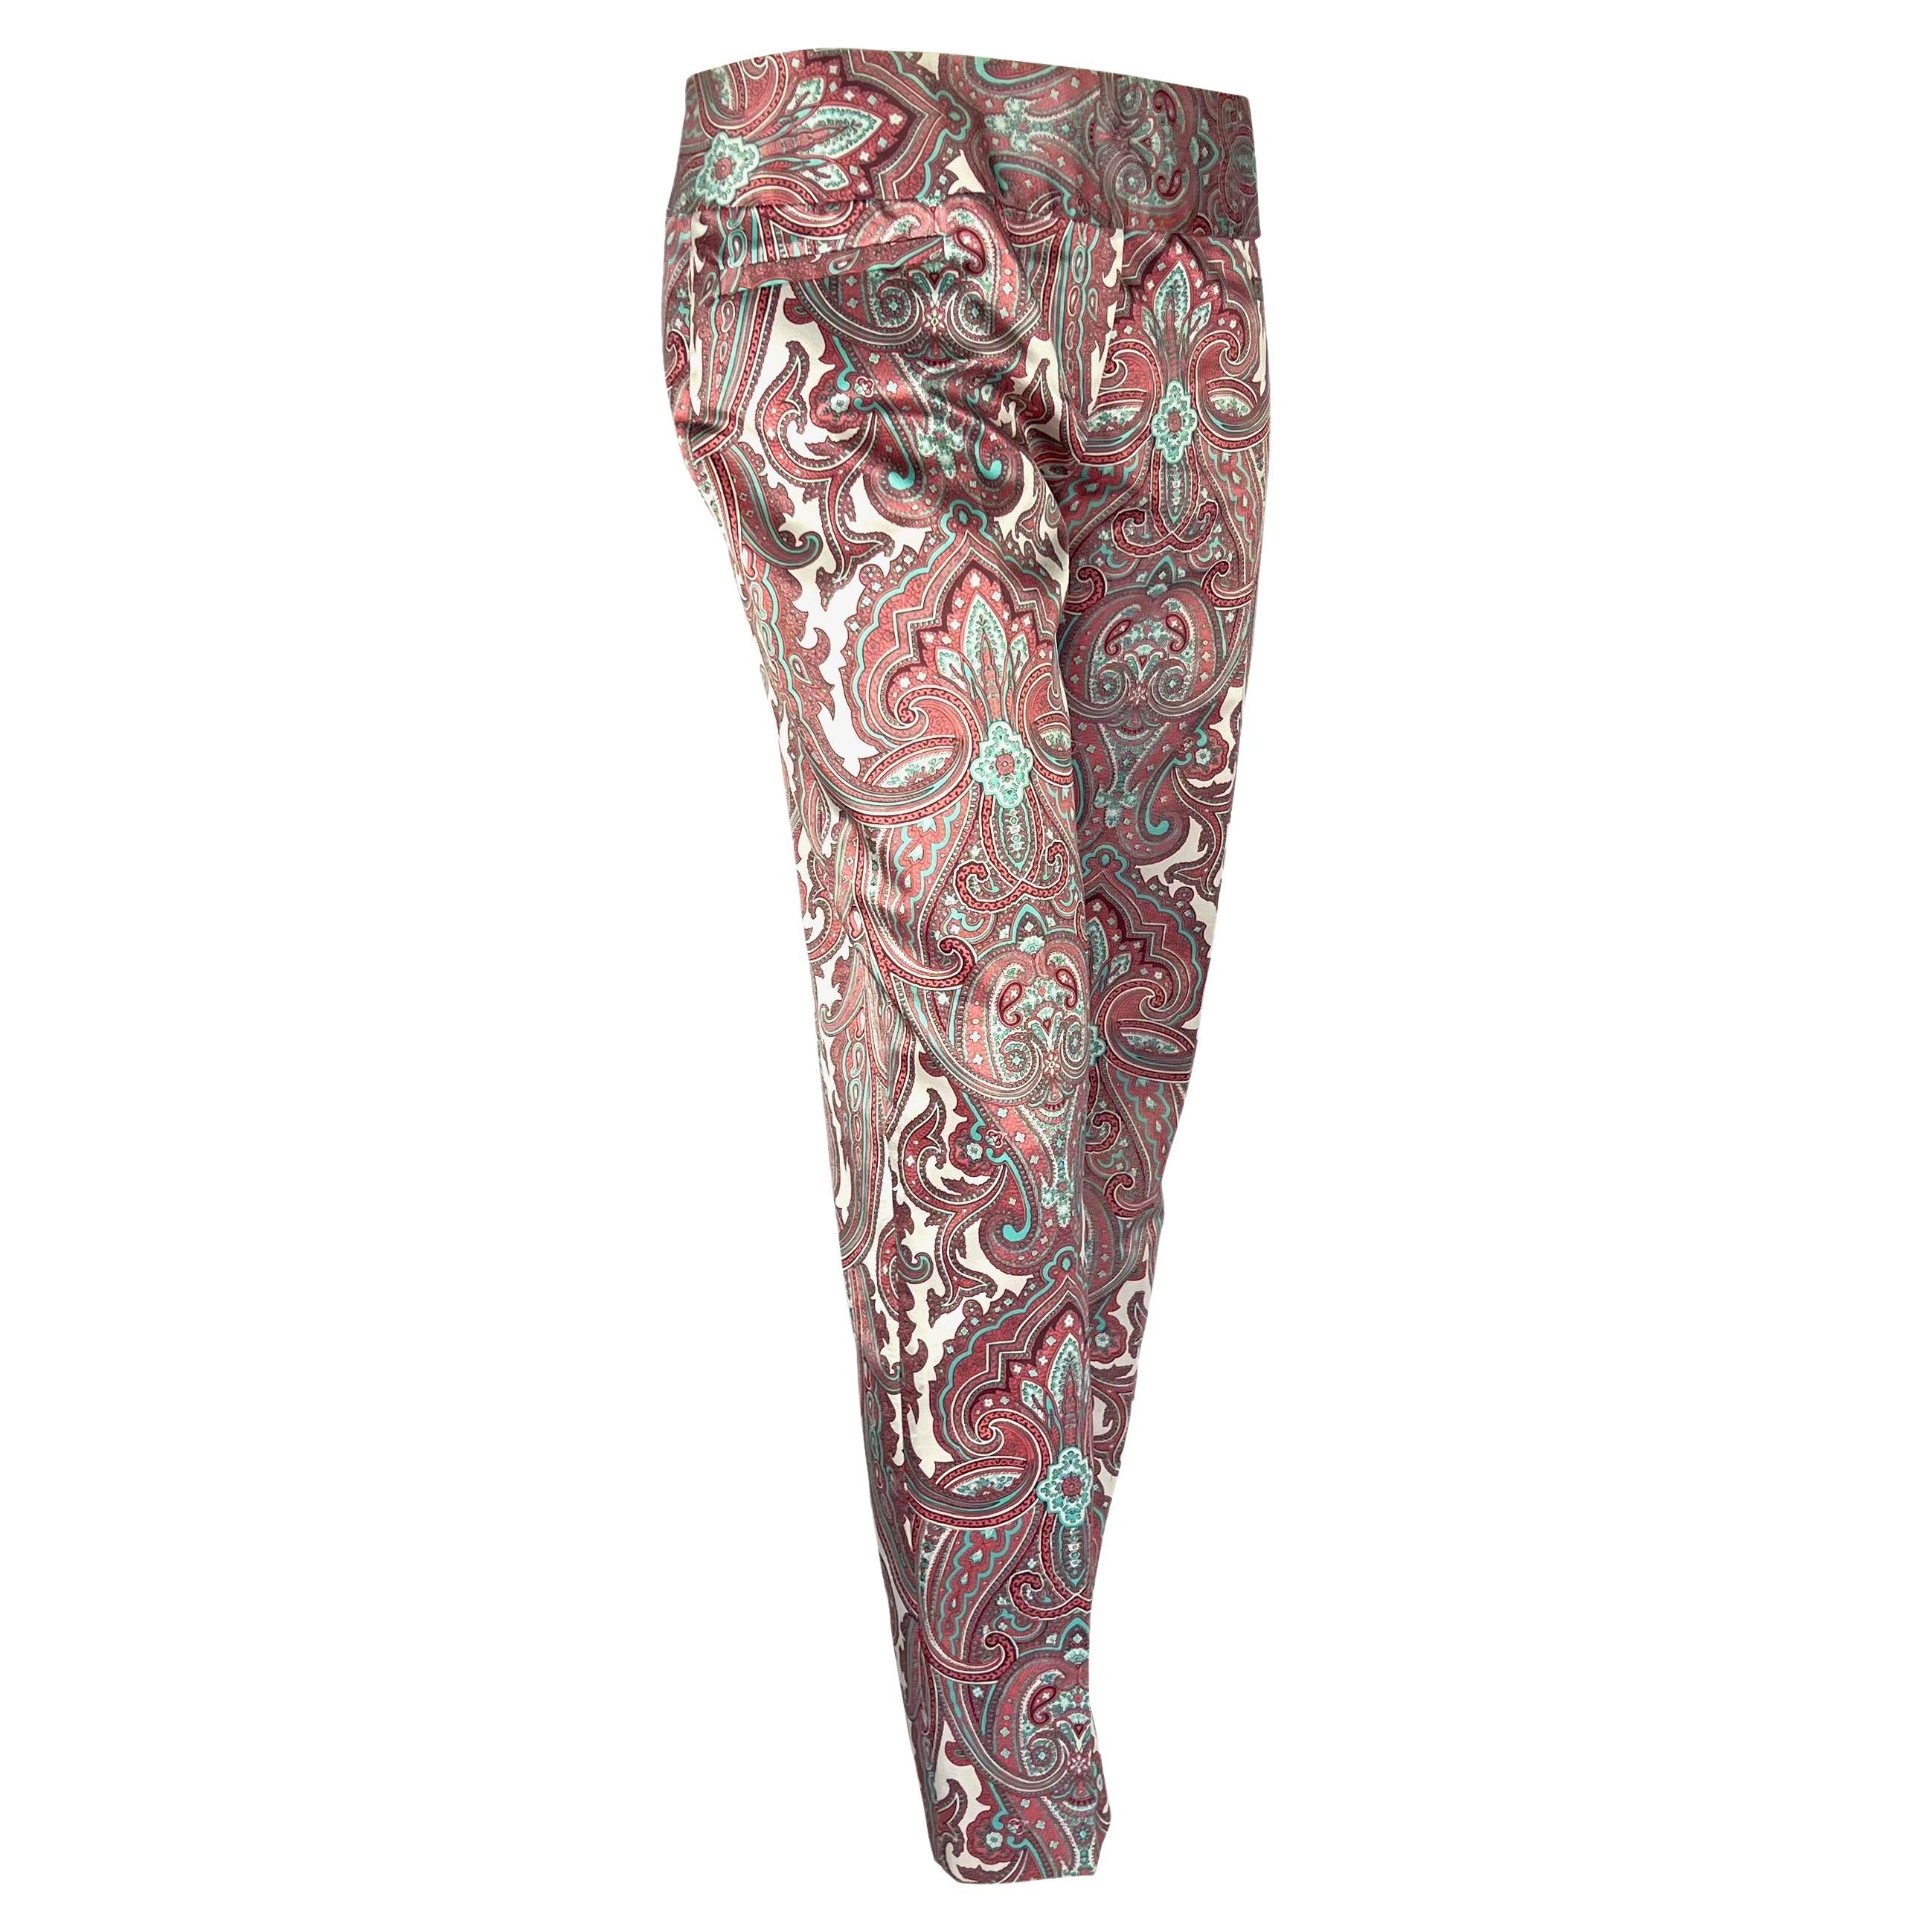 S/S 2000 Dolce & Gabbana White Pink Satin Paisley Print Tapered Cropped Pants For Sale 2